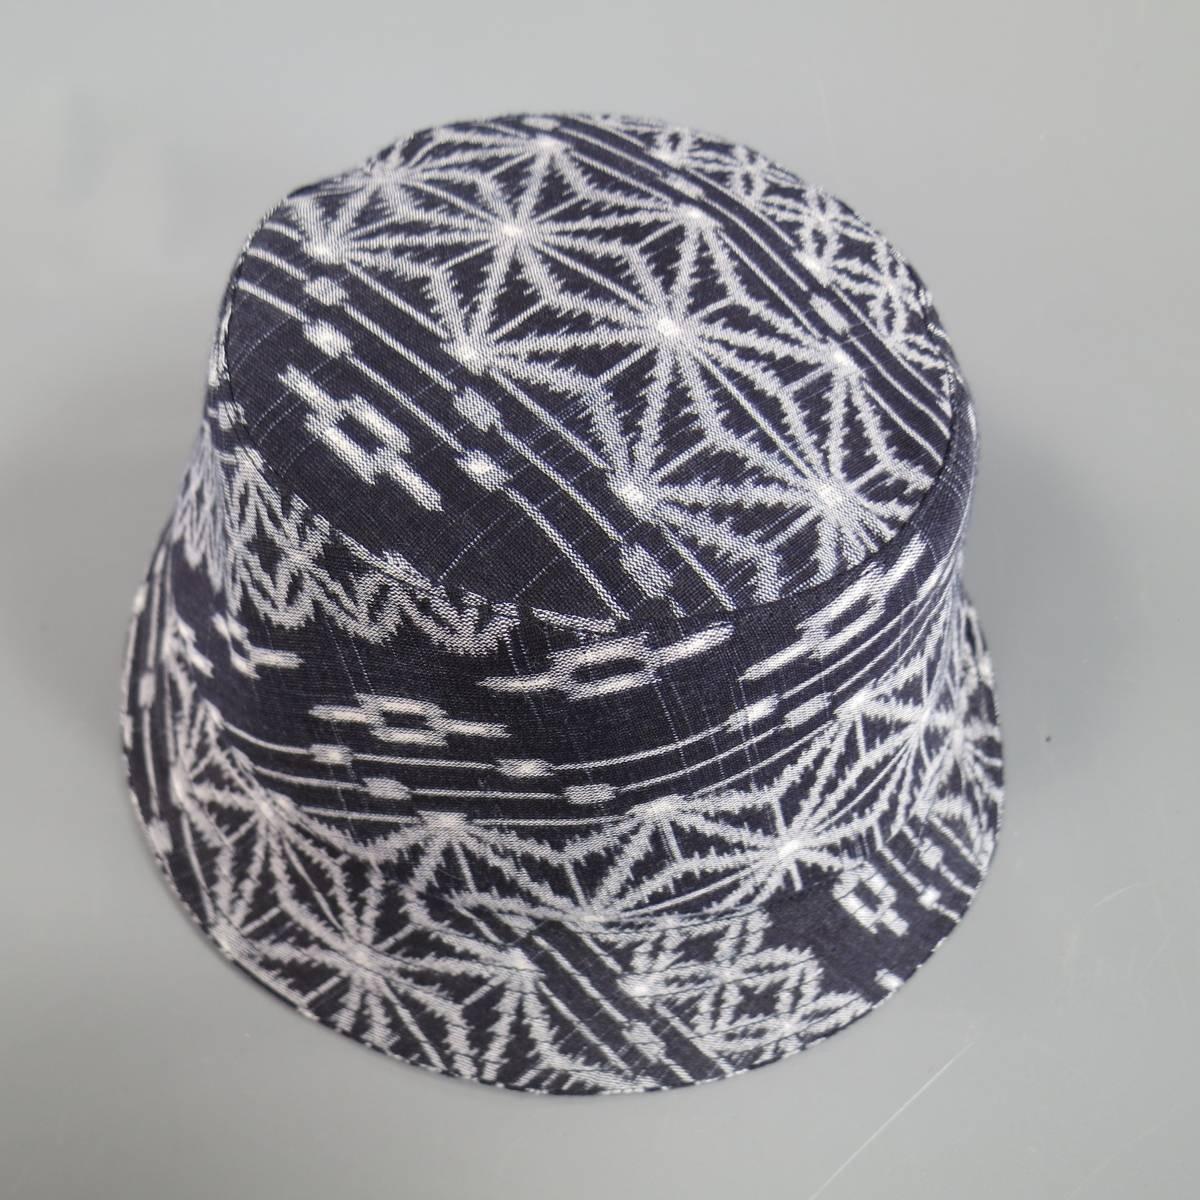 JUNYA WATANABE COMME DES GARCONS MAN bucket hat in navy and gray print with structured look and quilted brim. Made in Japan. Retails at $450.00.
 
New with Tags.
Marked: L